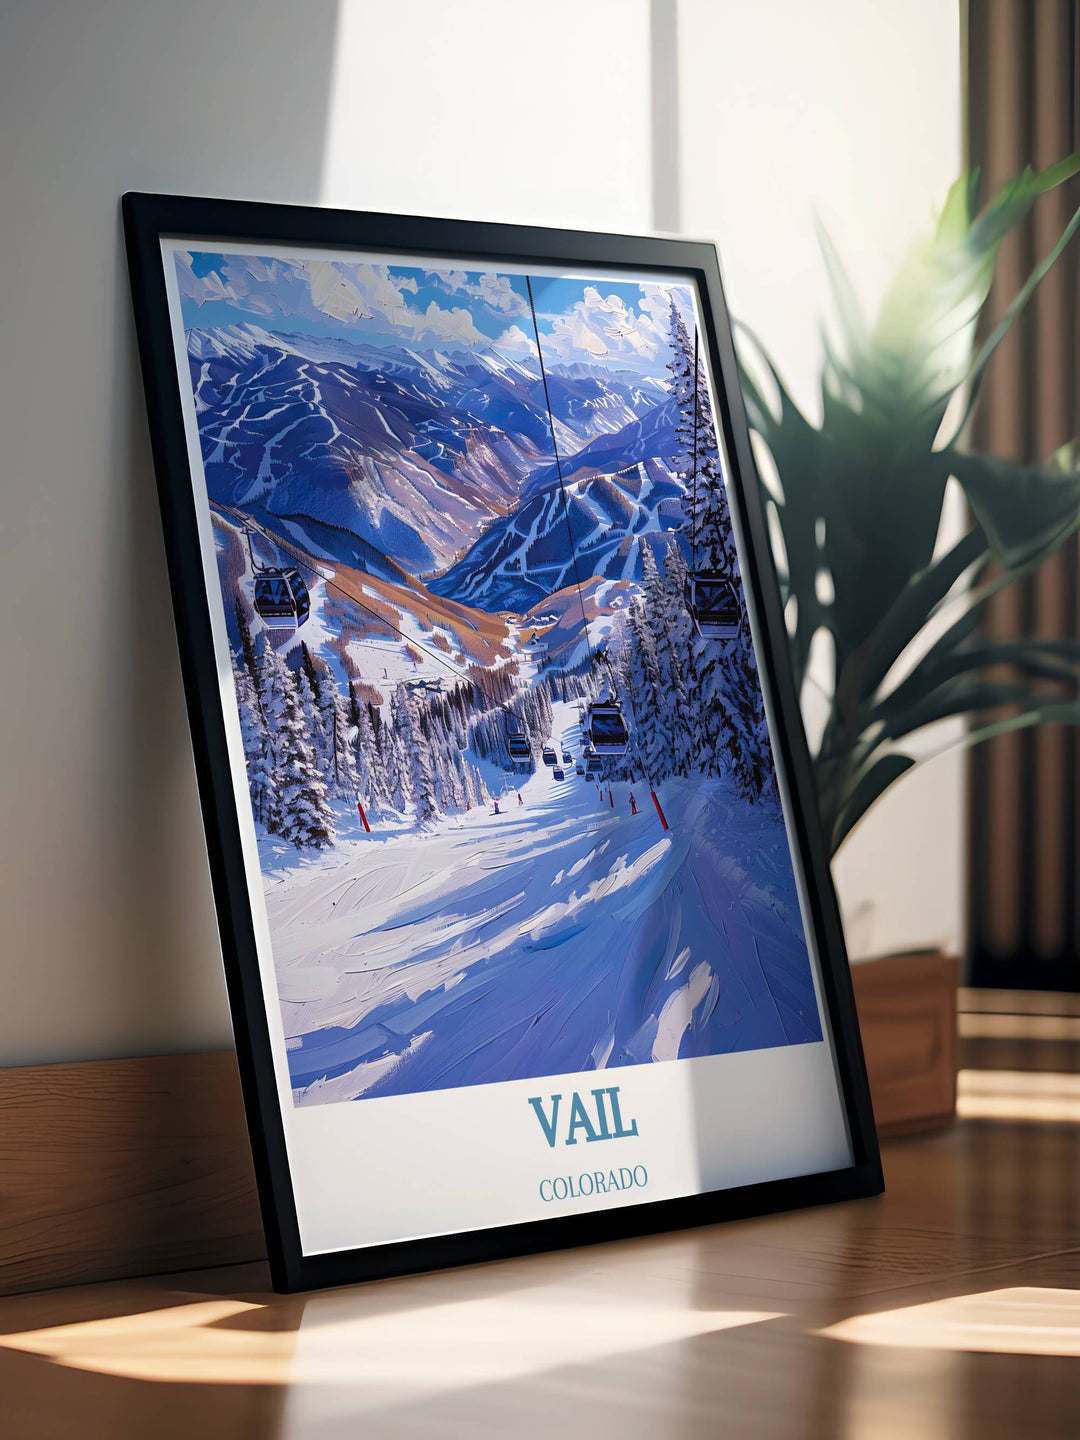 Colorado travel poster showcasing Vail Ski Resort, a bucket list destination for skiing enthusiasts. Captures the excitement and beauty of the resort, inspiring dreams of winter adventures.